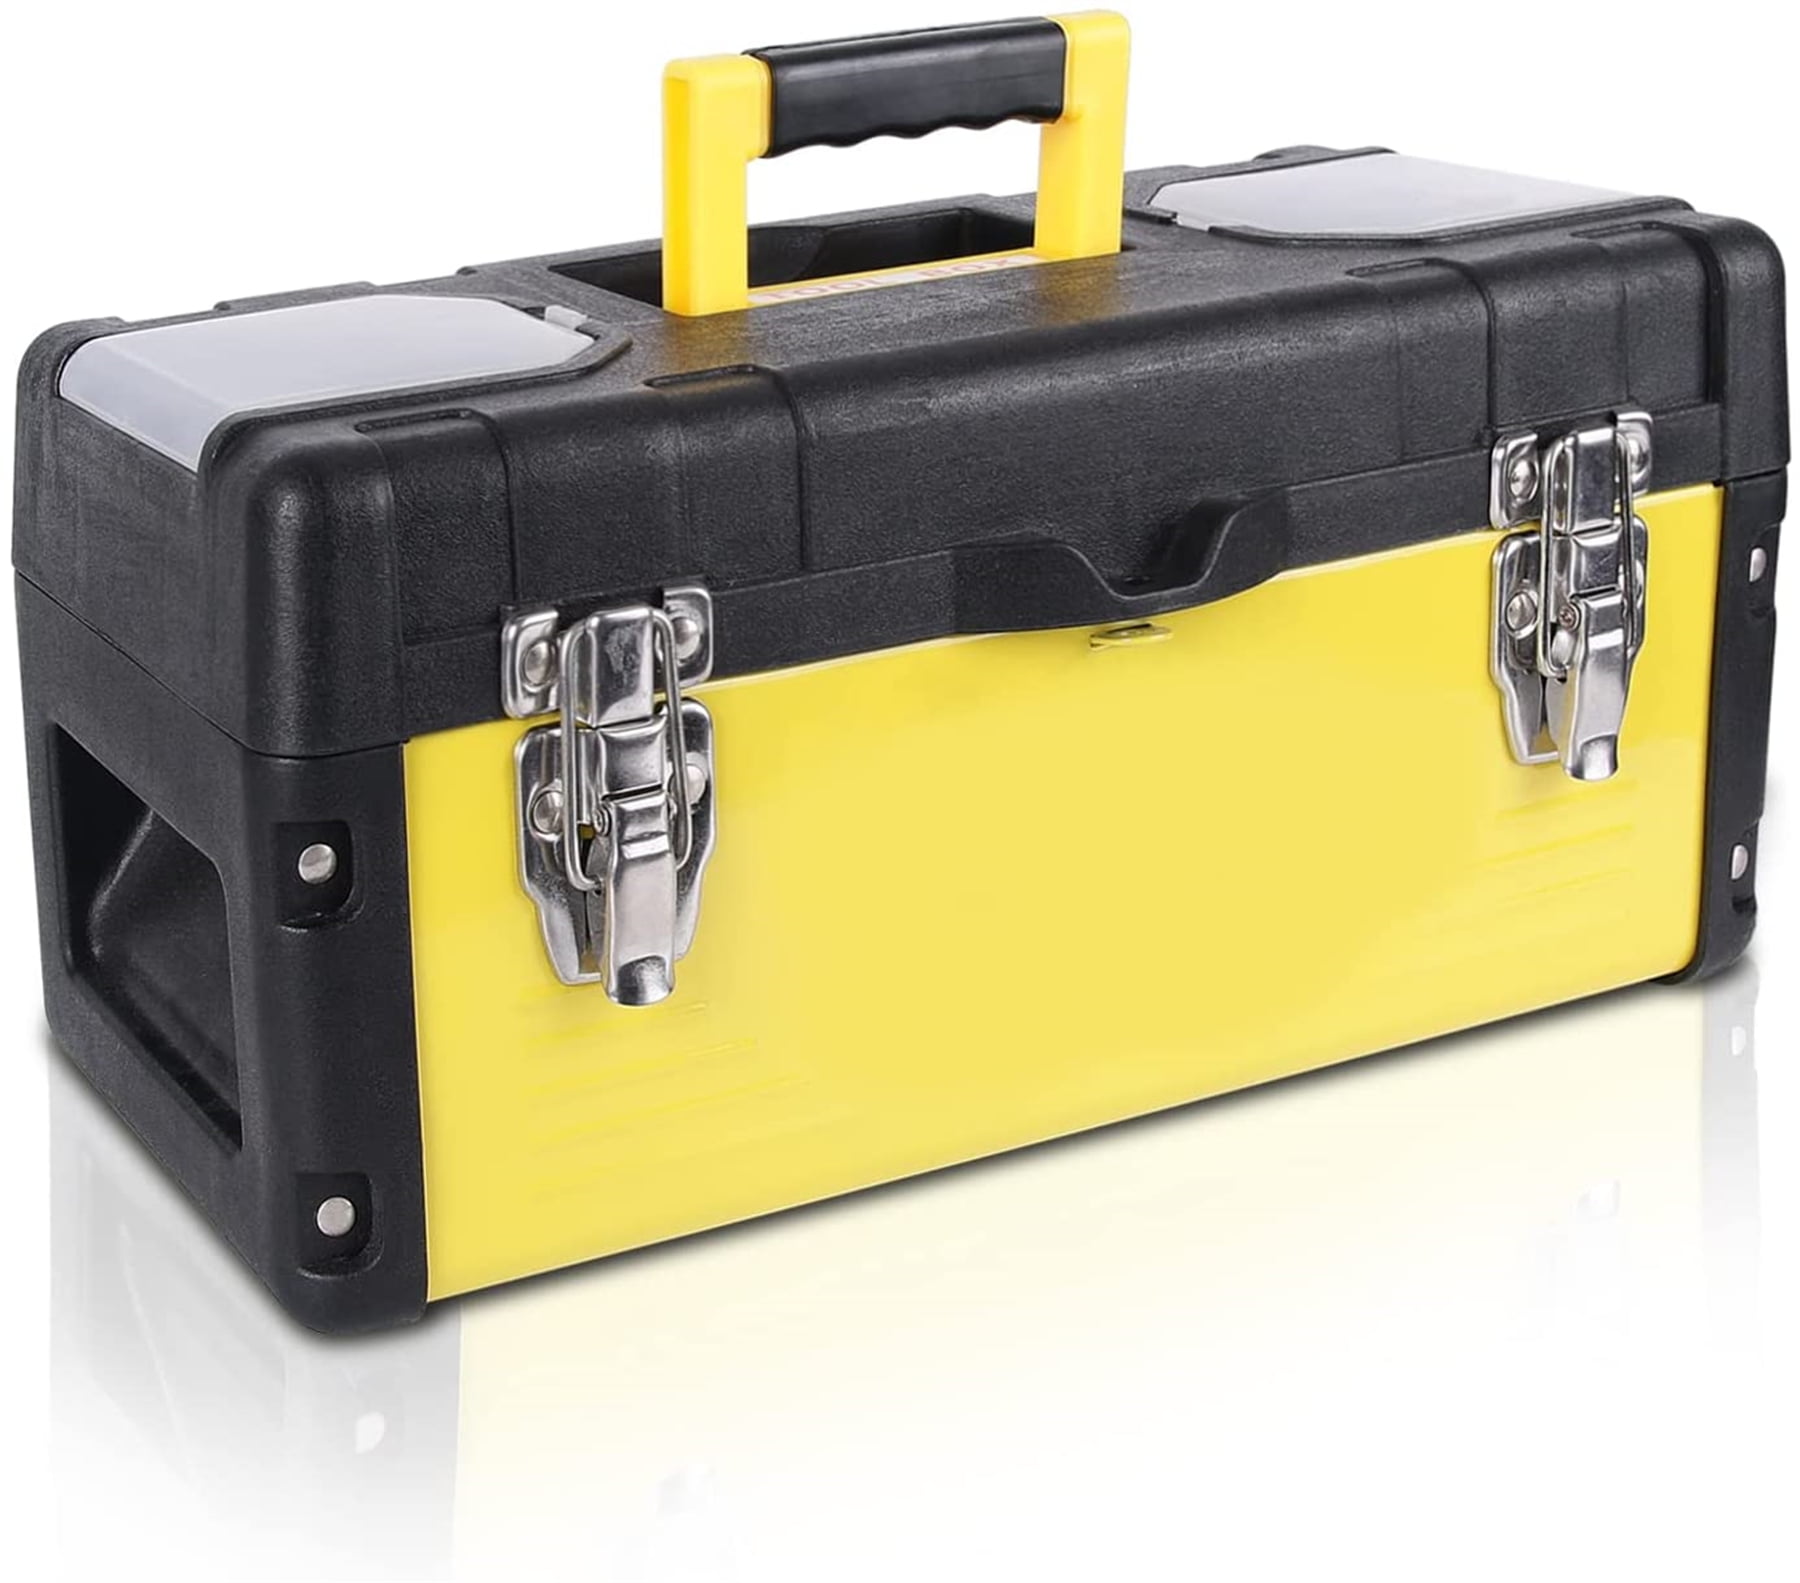 Tool Box with Removable Tool Tray Easy Access ,sloped side design for easy  lifting,built with stainless steel latch 